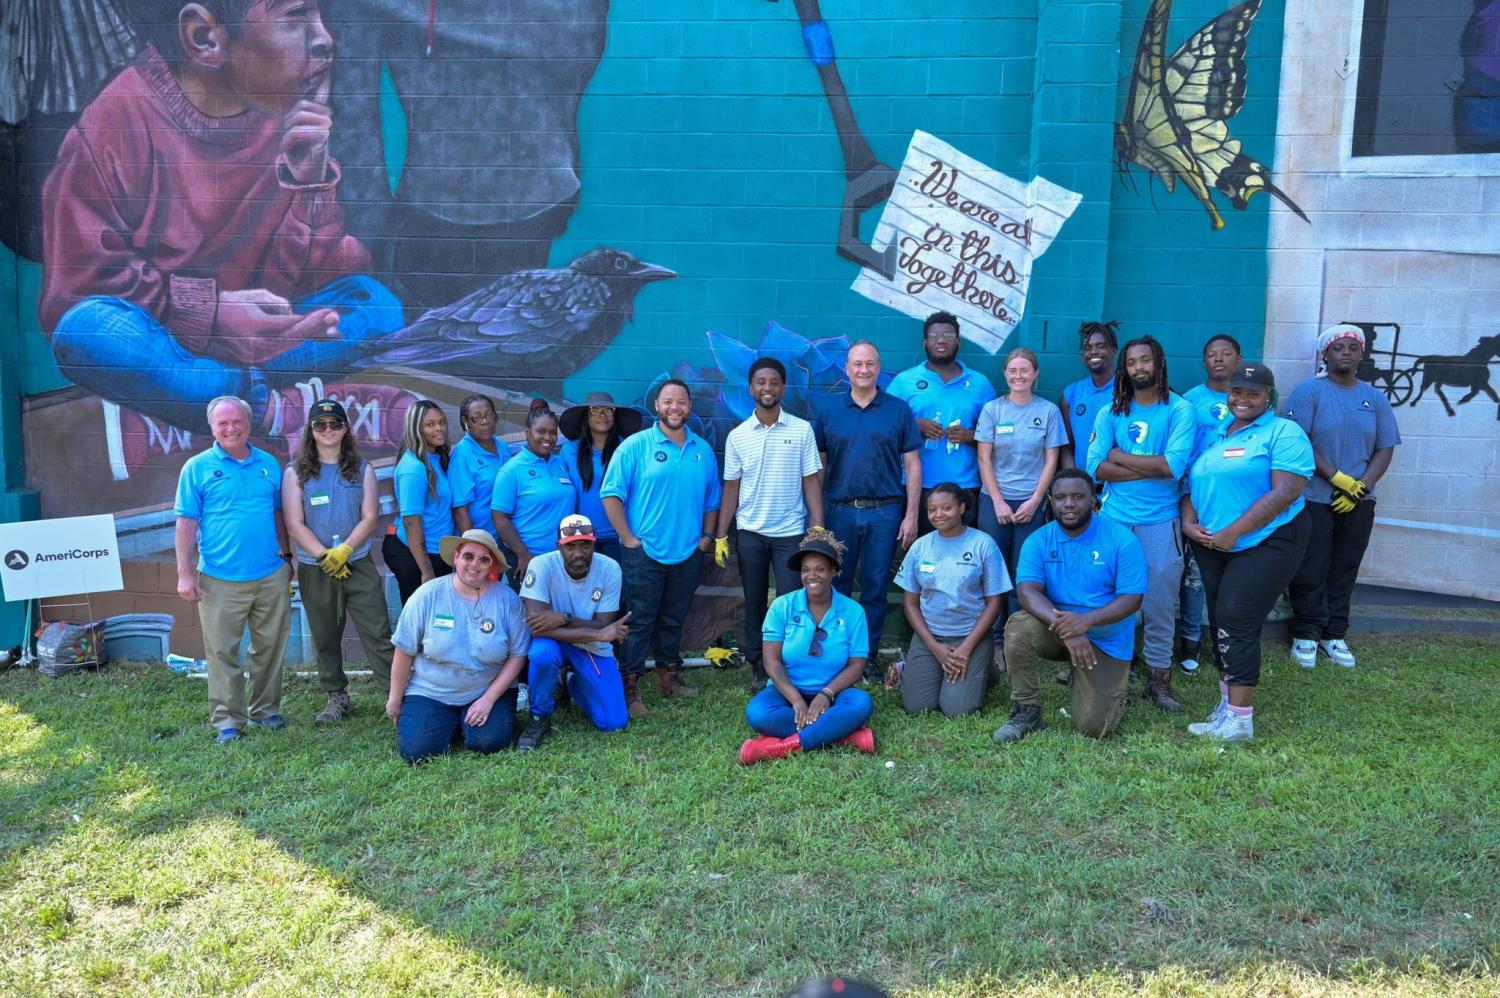 Group photo of mayor, AmeriCorps CEO, second gentleman, and AmeriCorps members